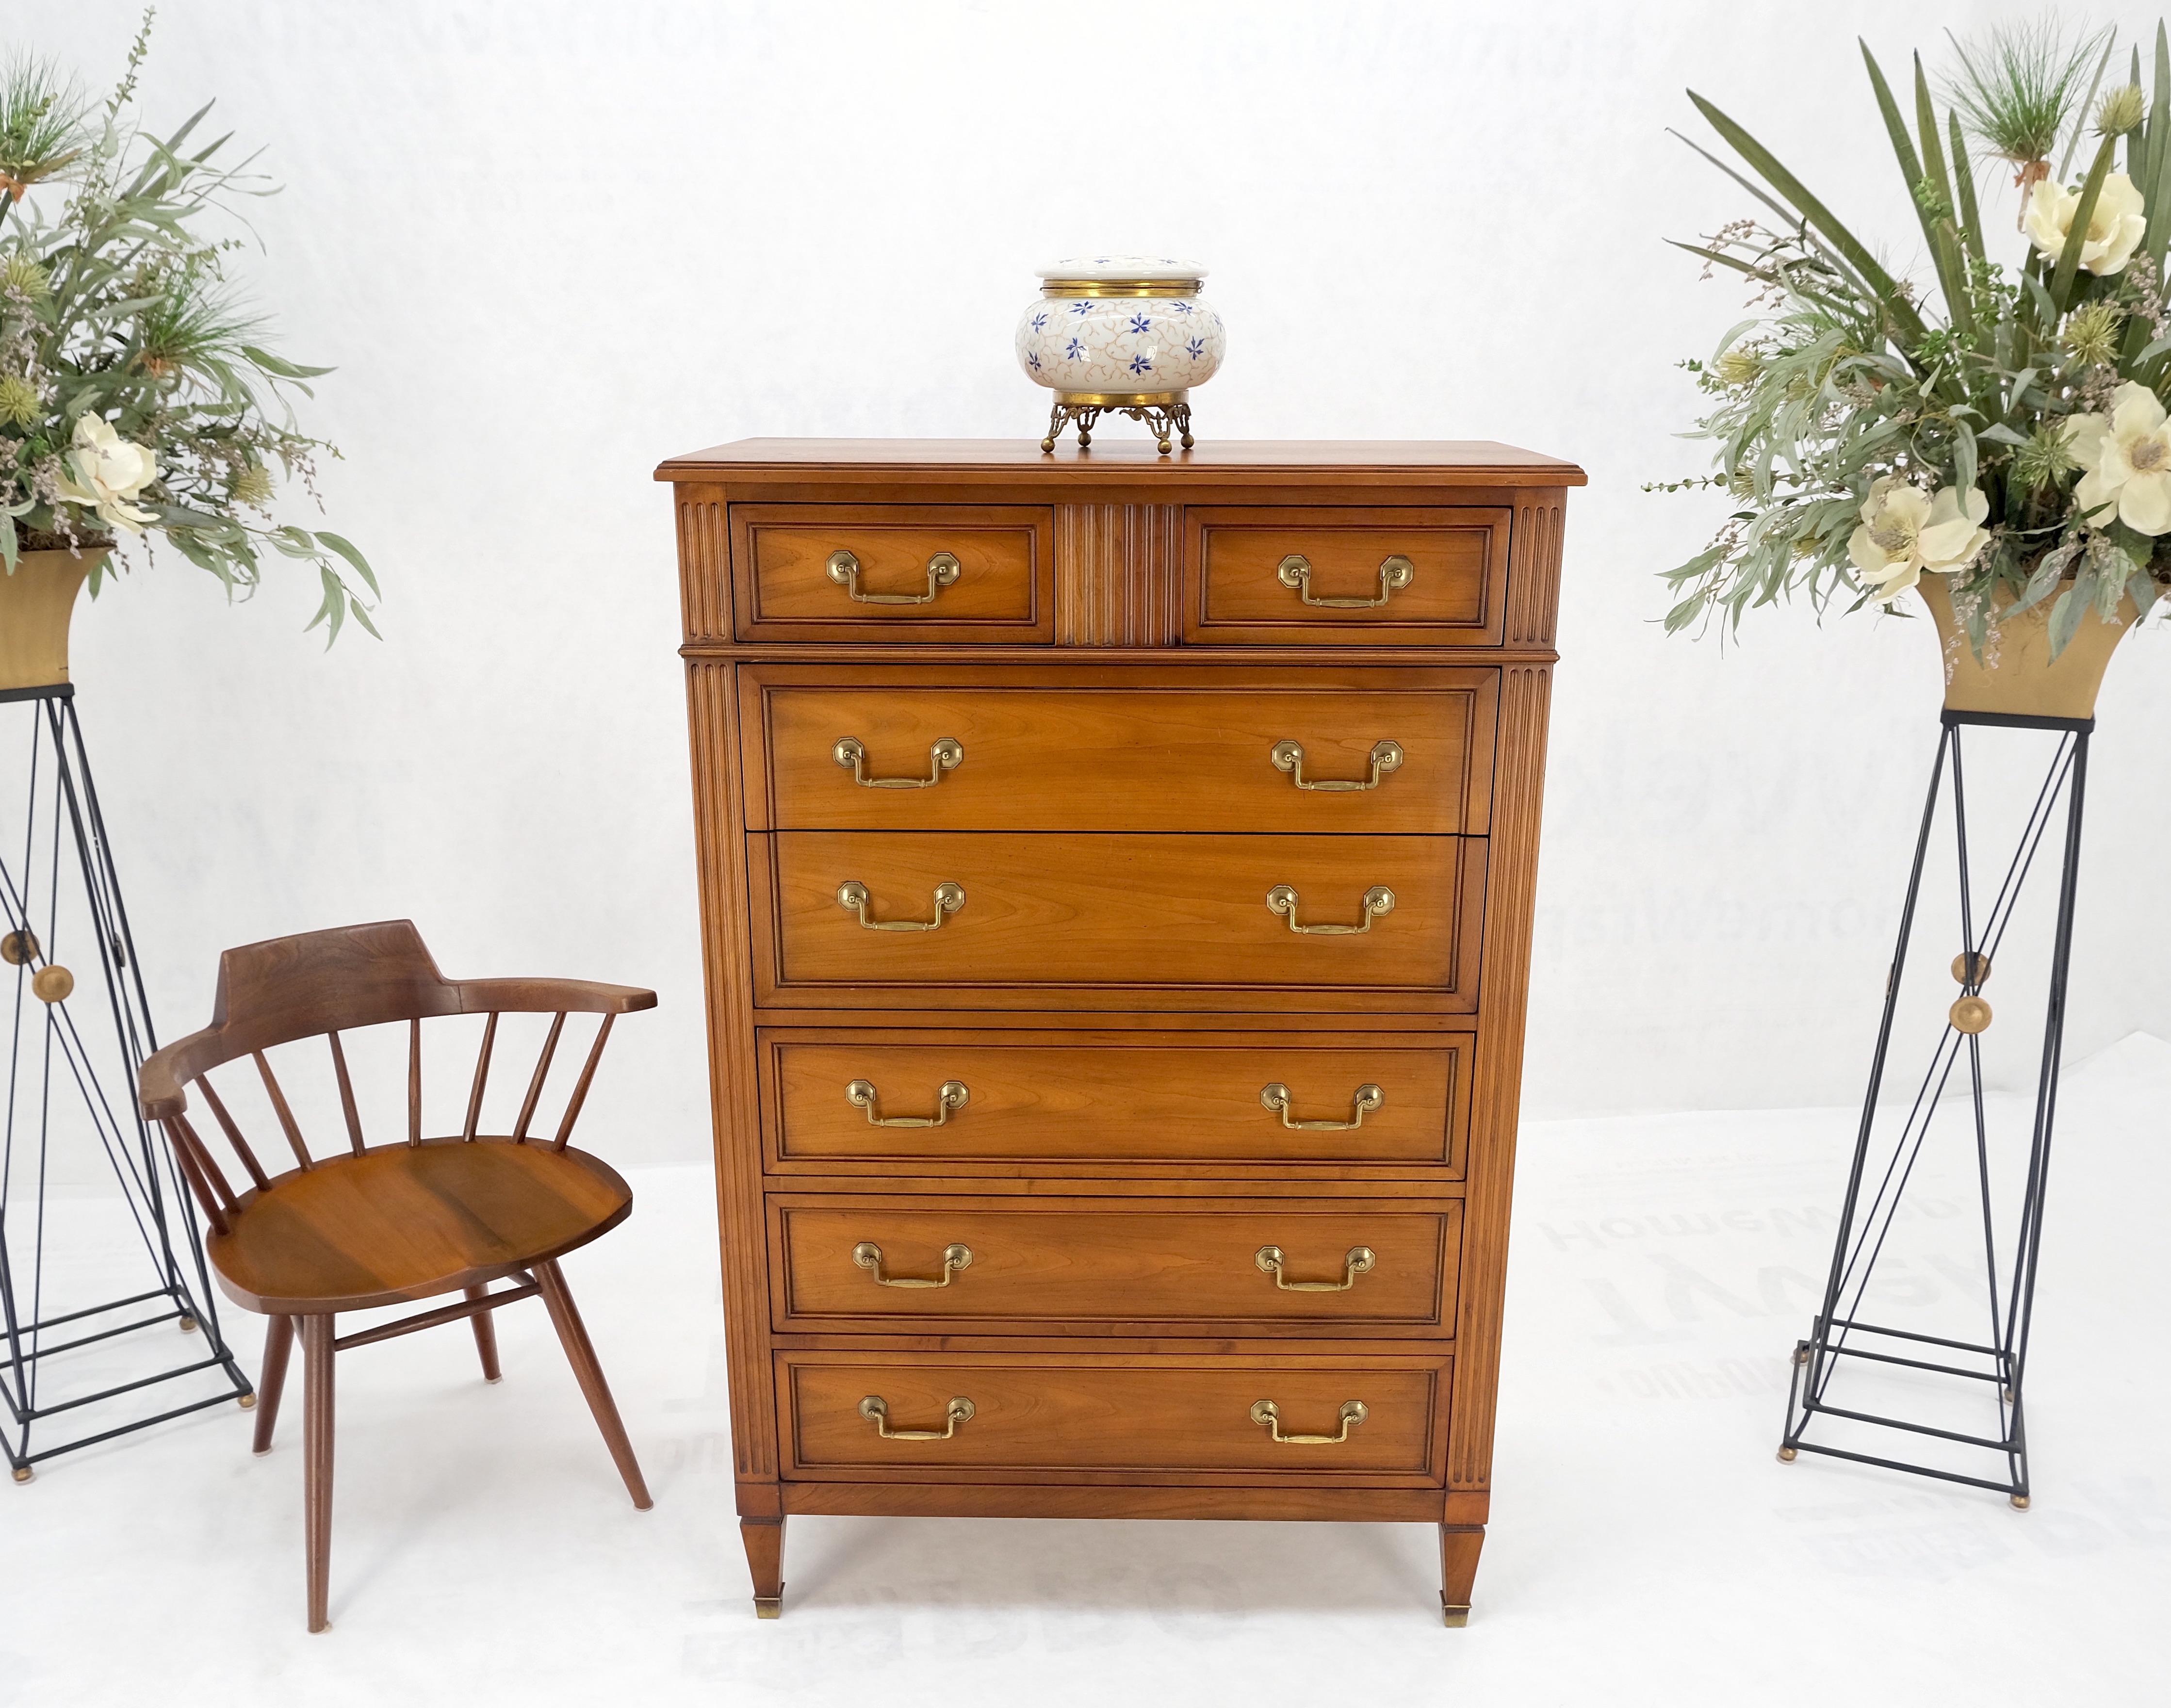 Kindel 7 Drawers Fruitwood Heavy Brass Drop Pulls High Chest Tall Dresser Mint! For Sale 3